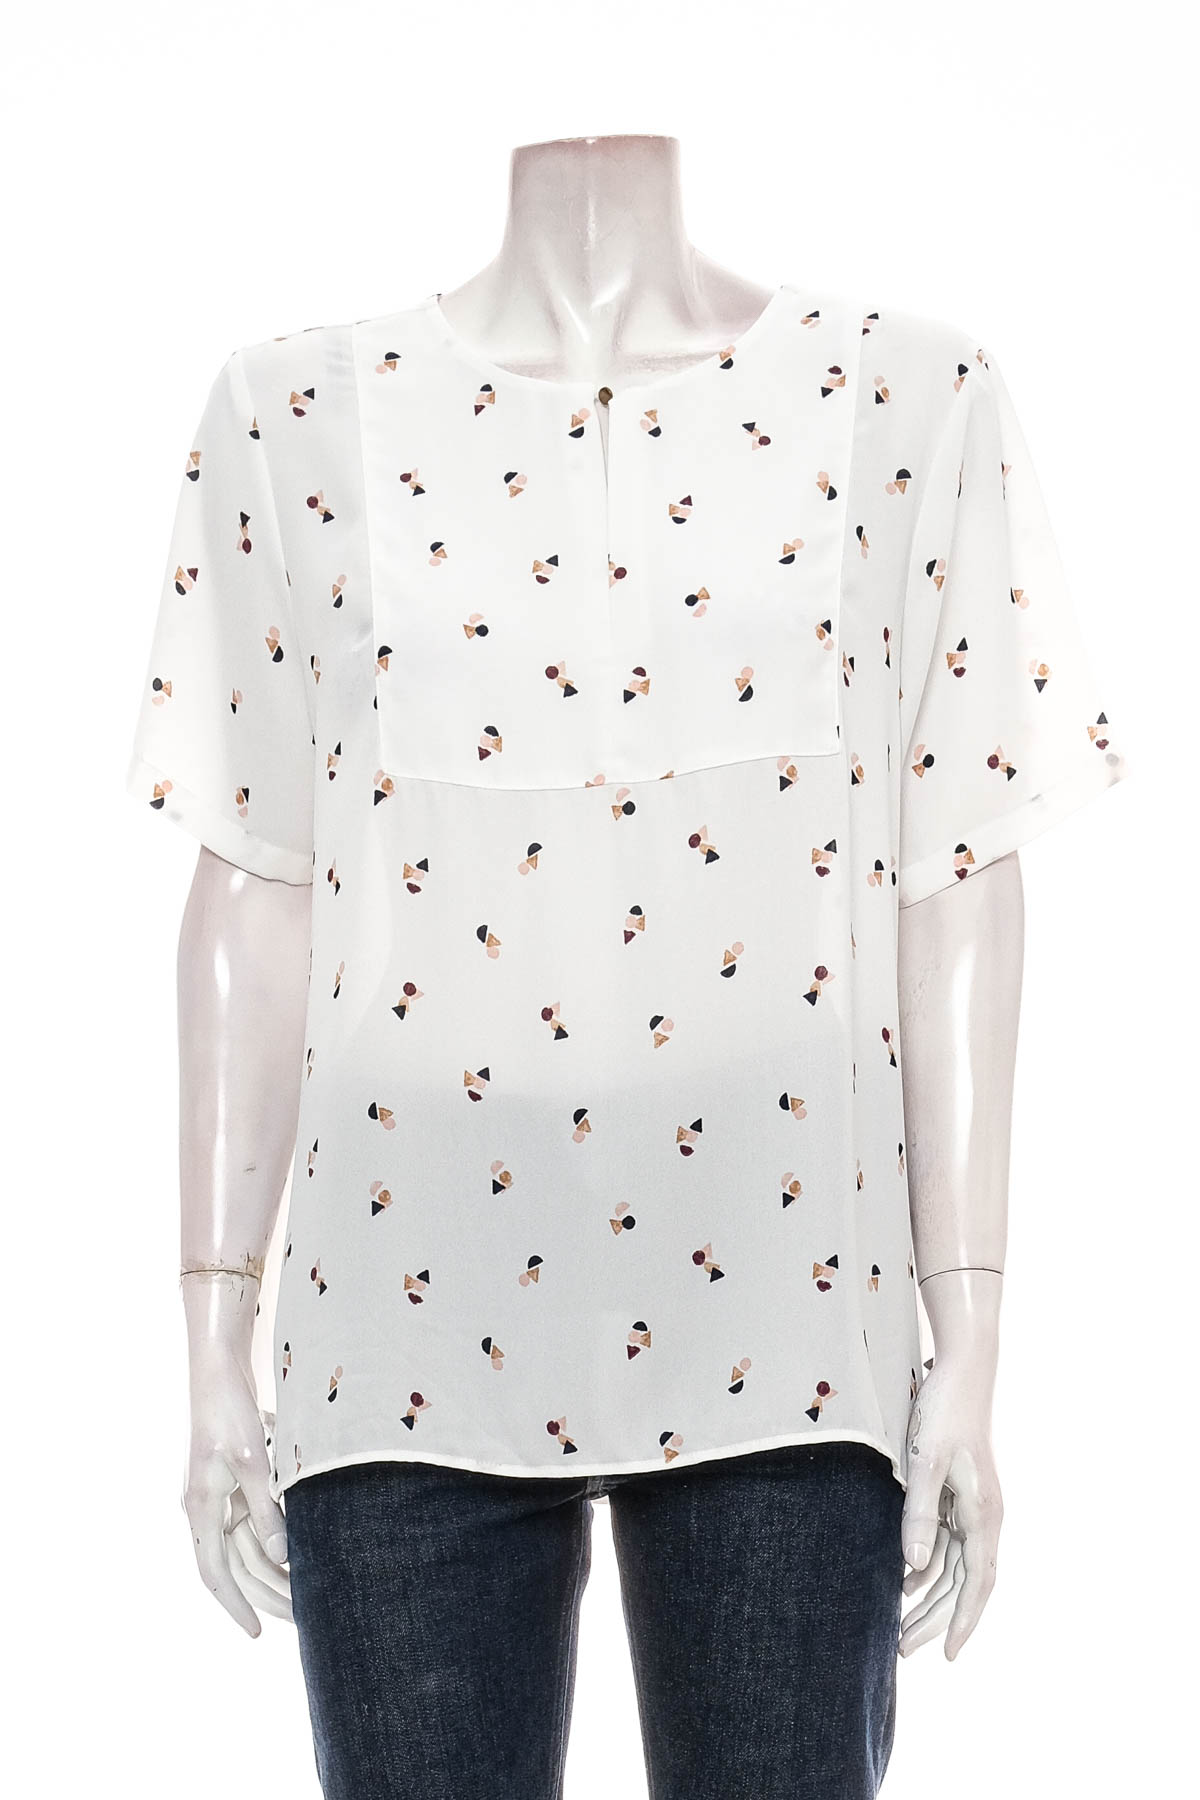 Women's shirt - M&S COLLECTION - 0